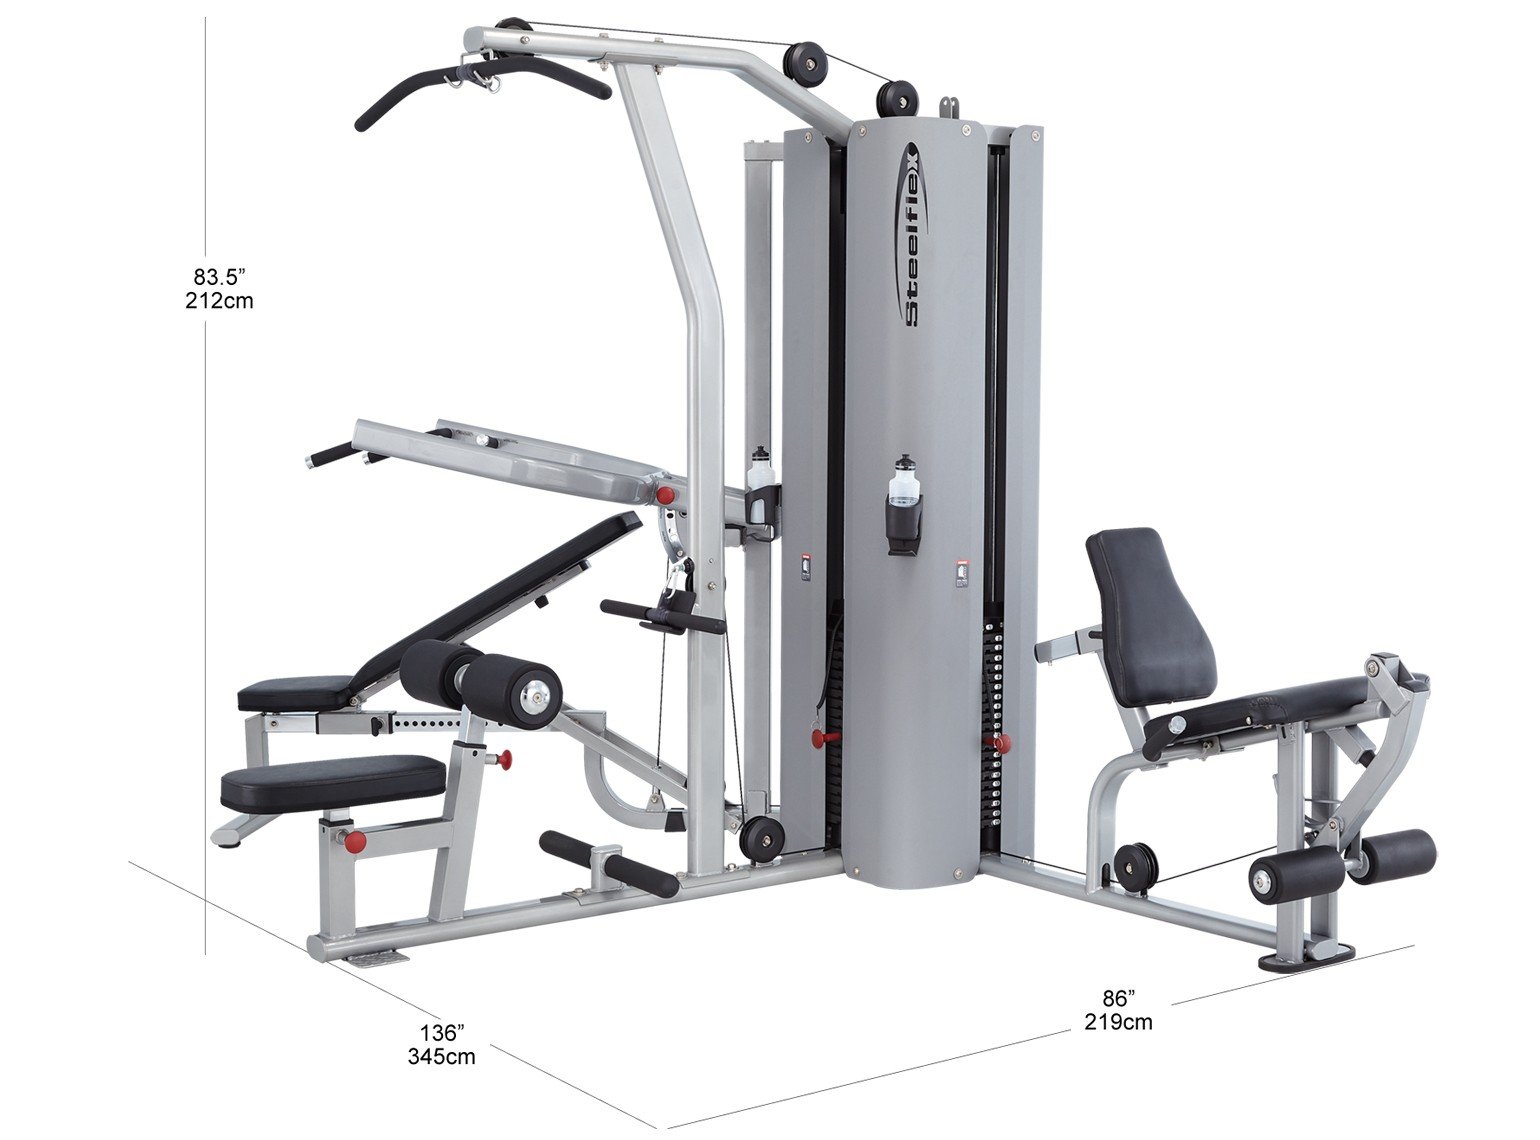 SteelFlex MG300 Commercial Multi Station Gym Machine 630 lb. Pulley Weight Stack - image 3 of 4